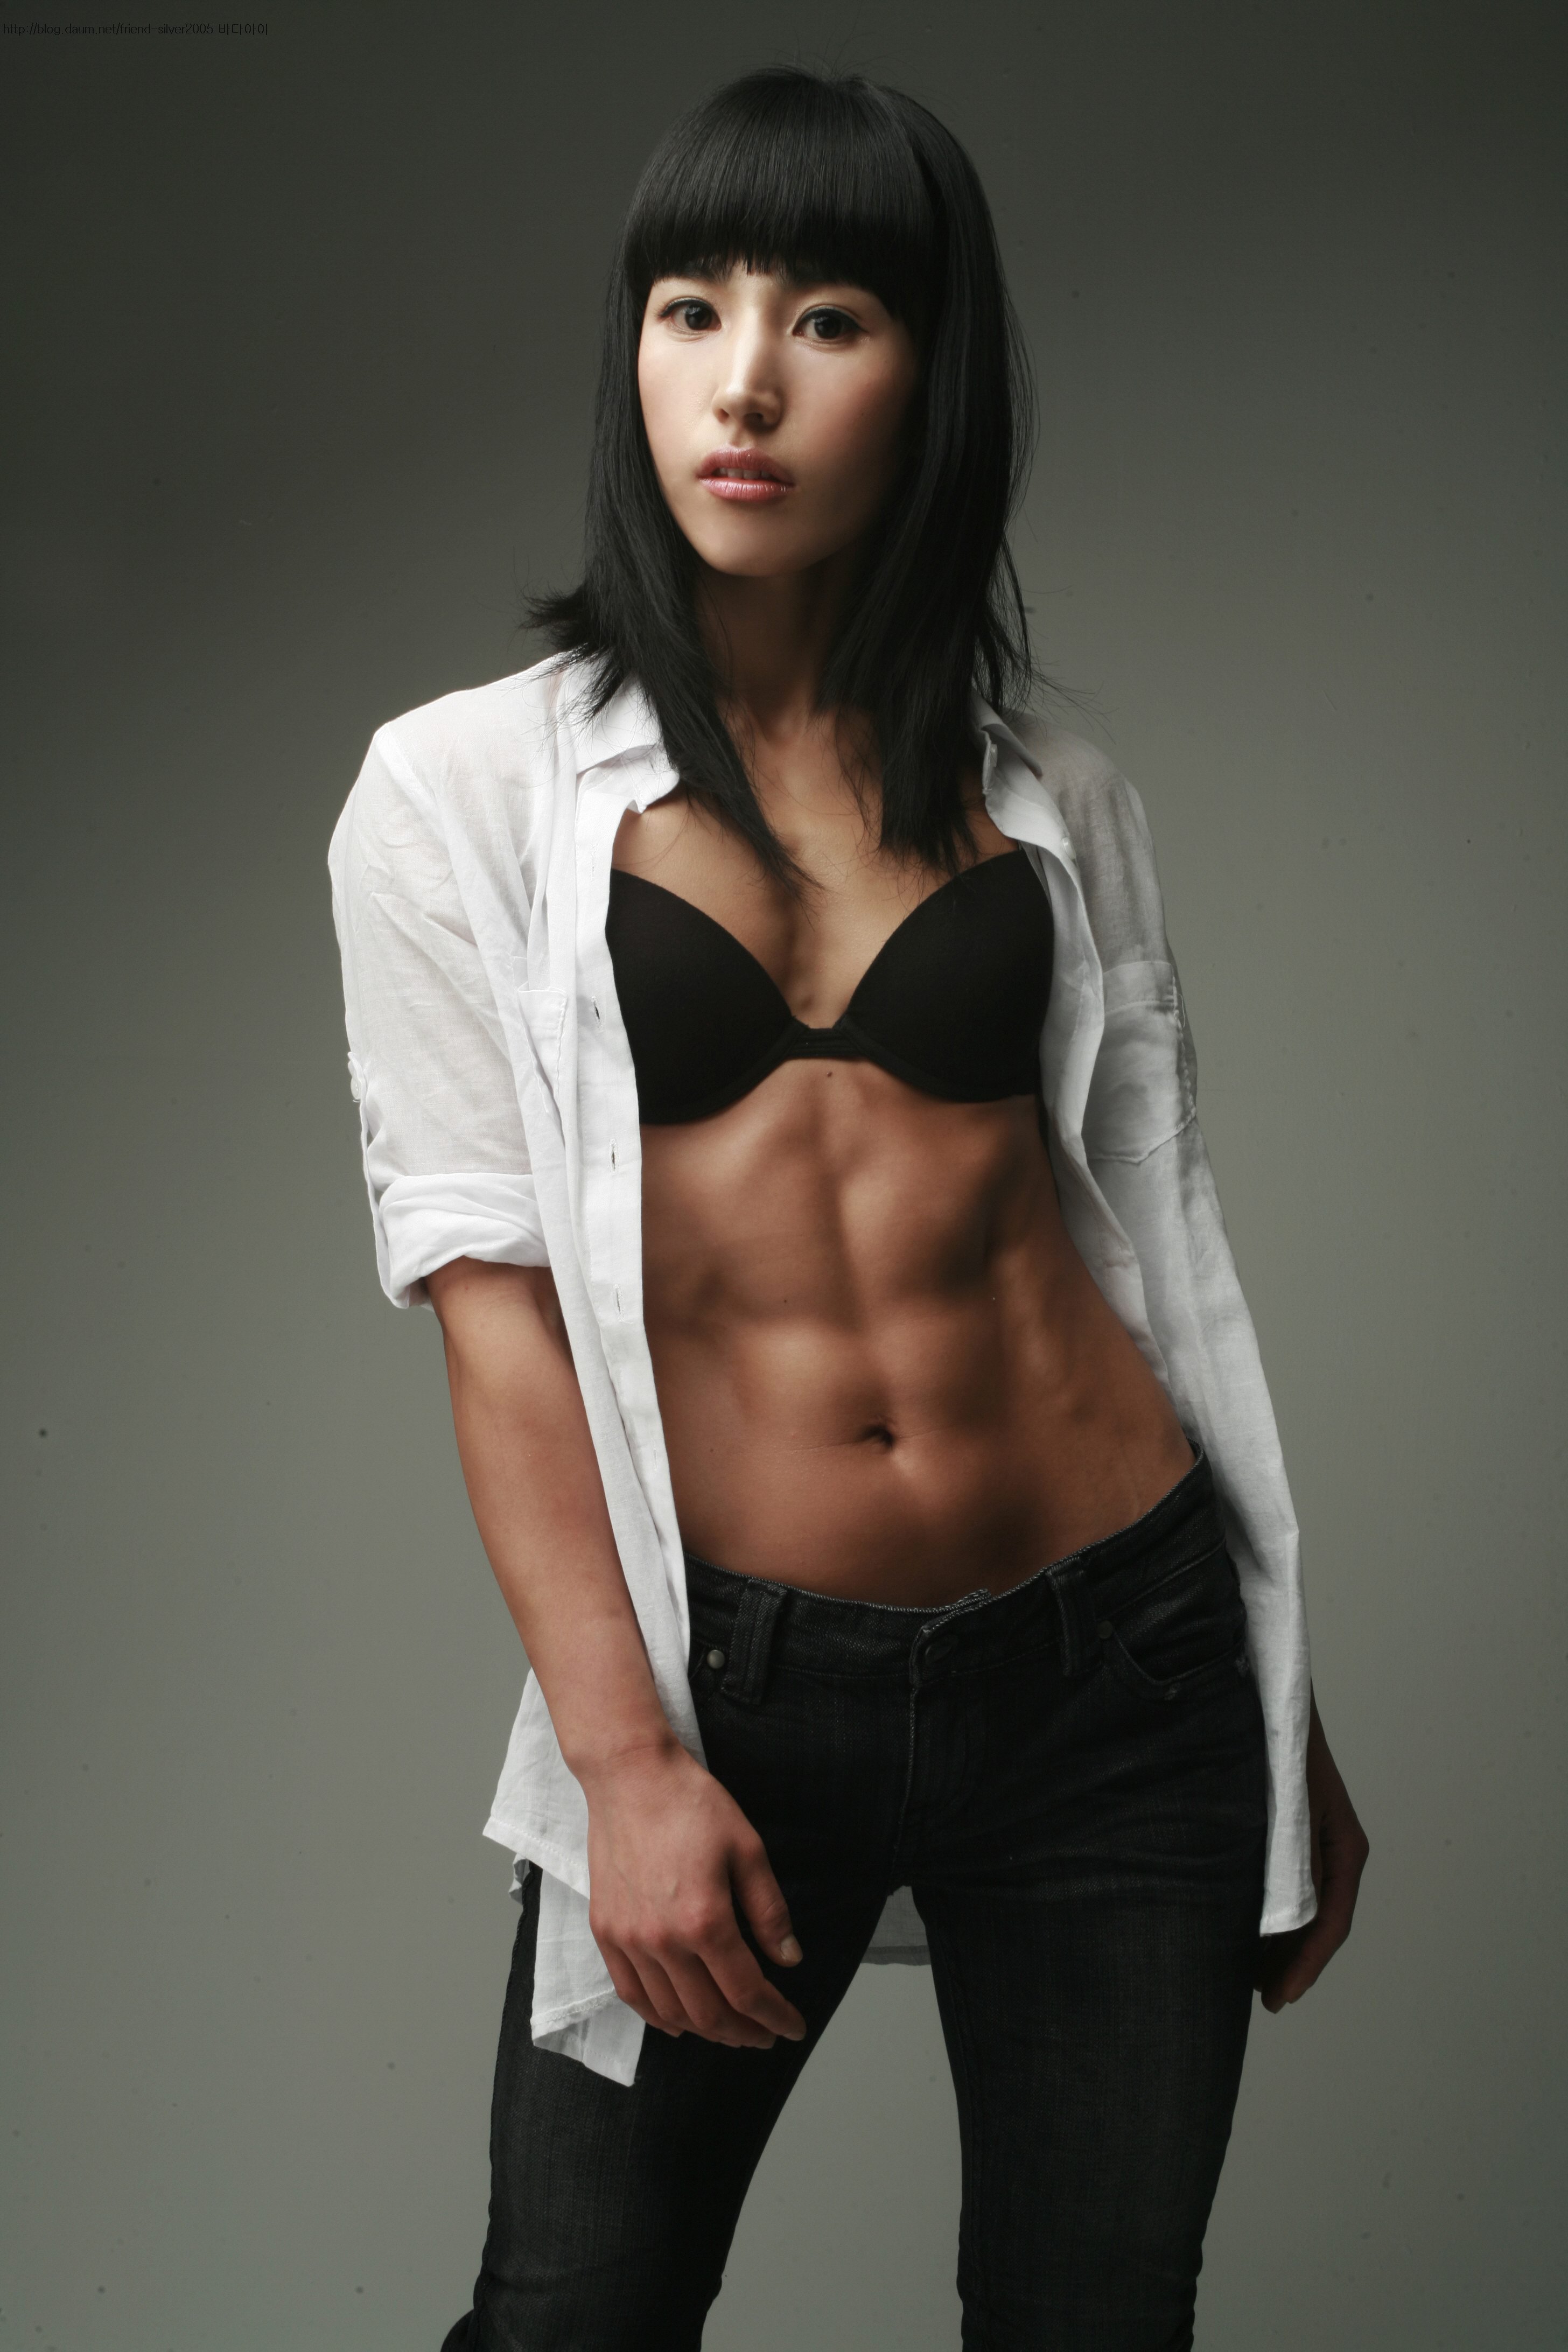 Abs asian